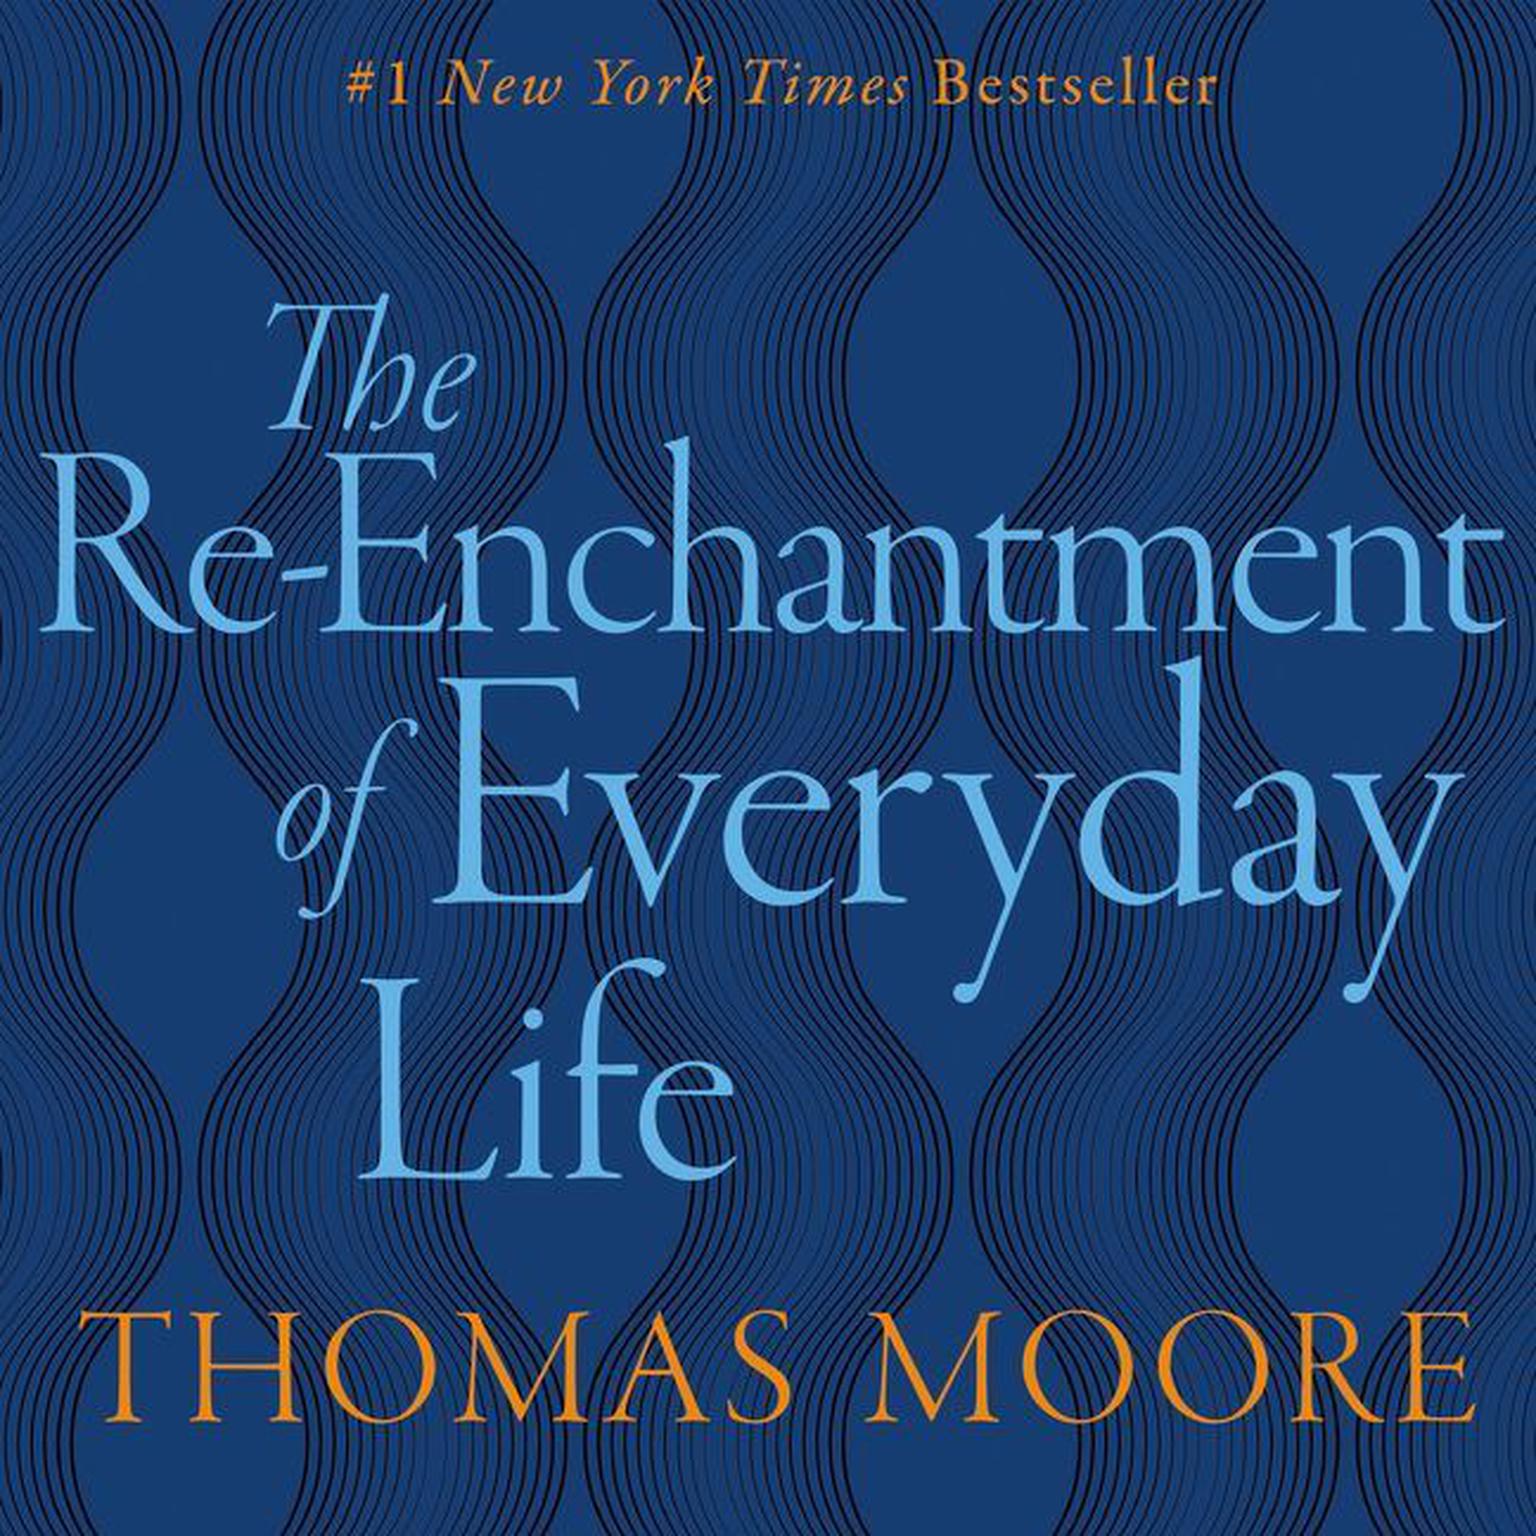 REENCHANTMENT OF EVERYDAY LIFE (Abridged) Audiobook, by Thomas Moore